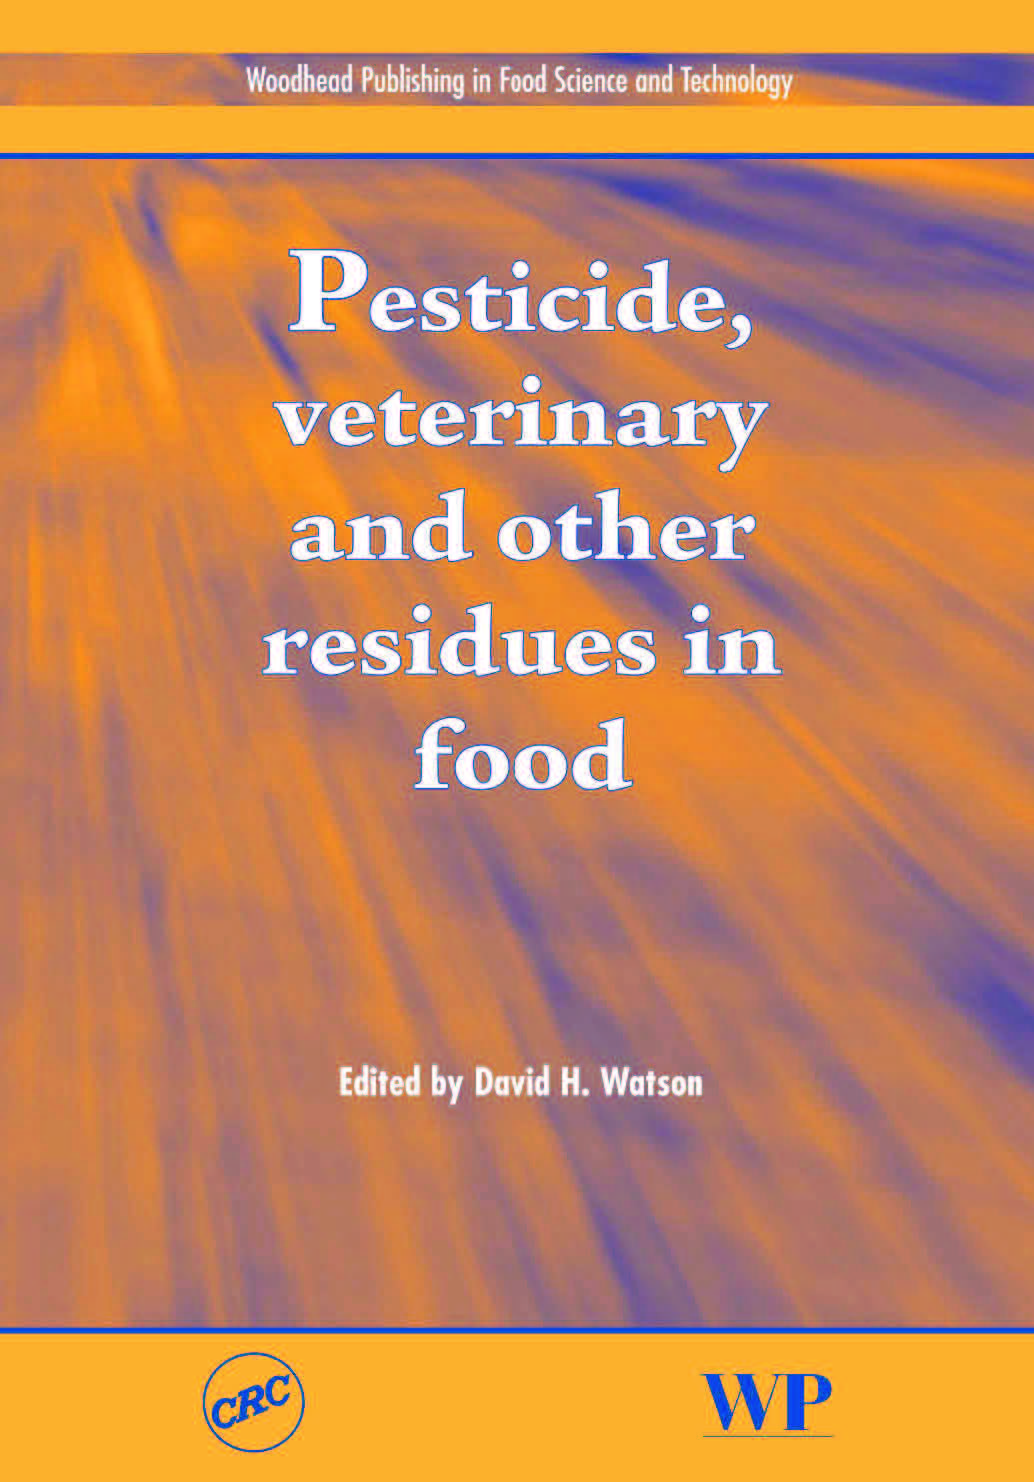 Pesticide, Veterinary And Other Residues In Food PDF